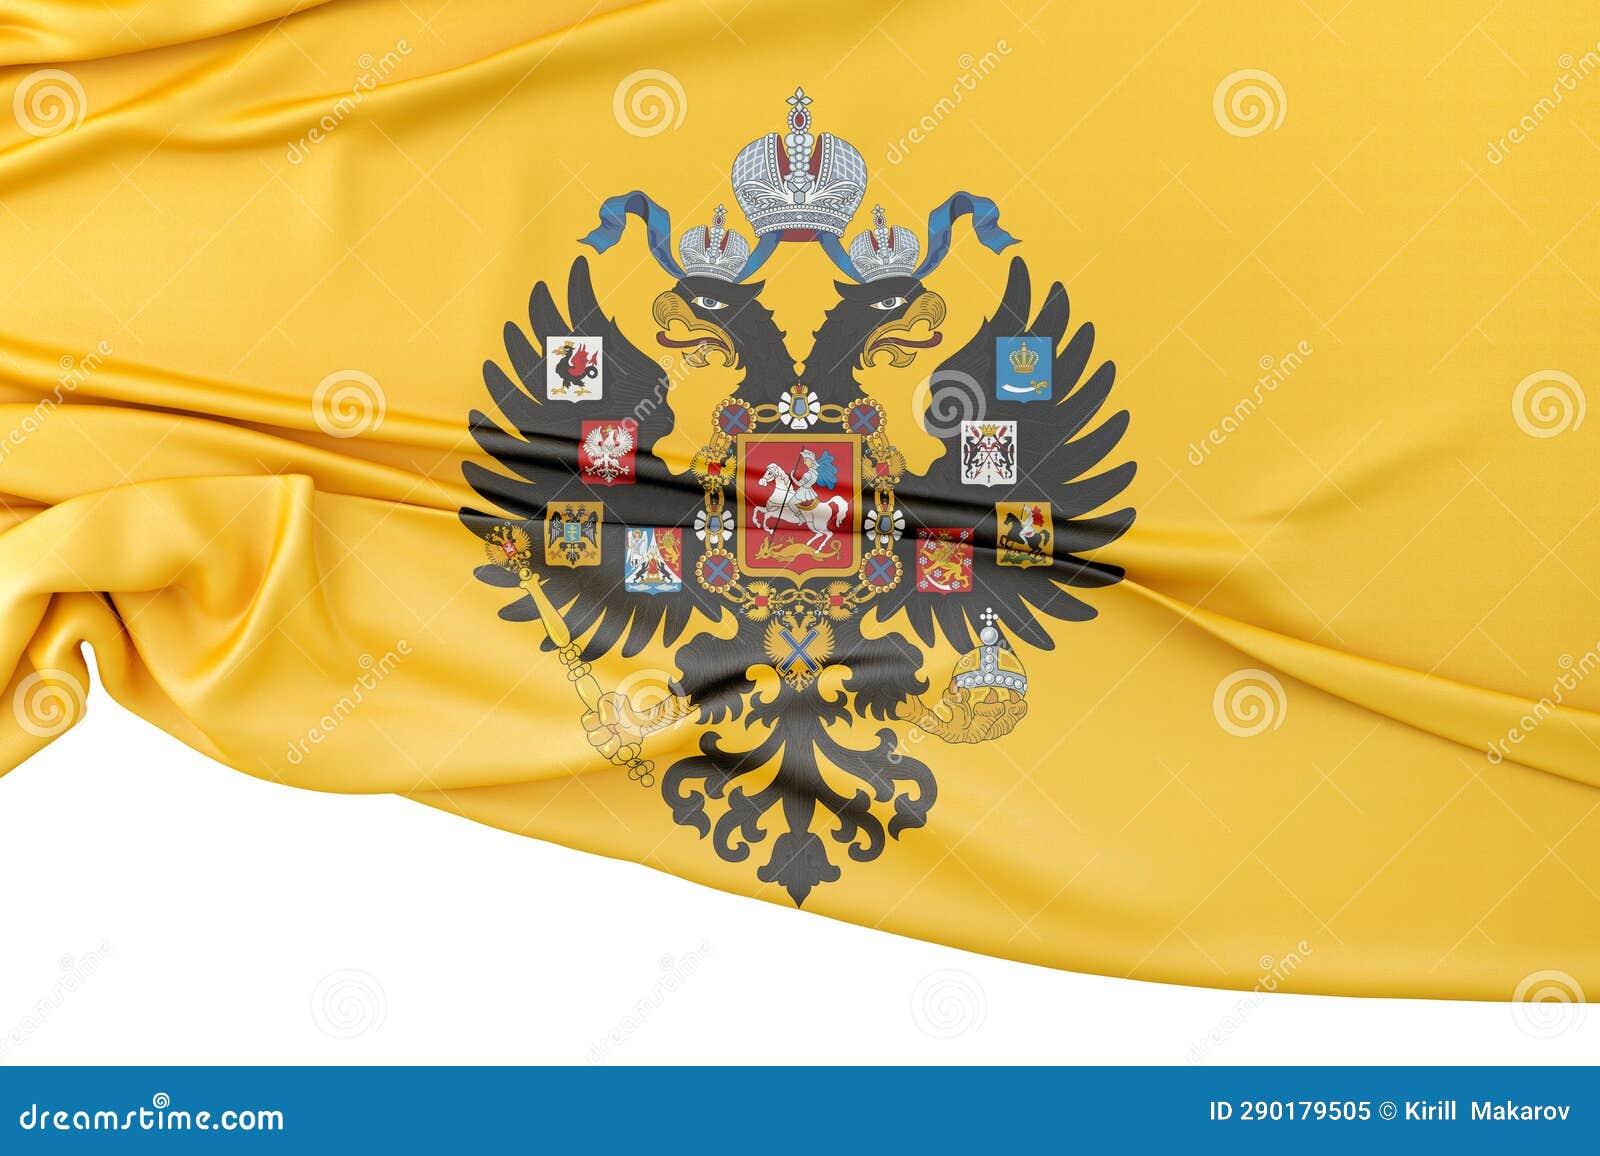 https://thumbs.dreamstime.com/z/isolated-flag-russian-empire-copy-space-below-d-rendering-290179505.jpg